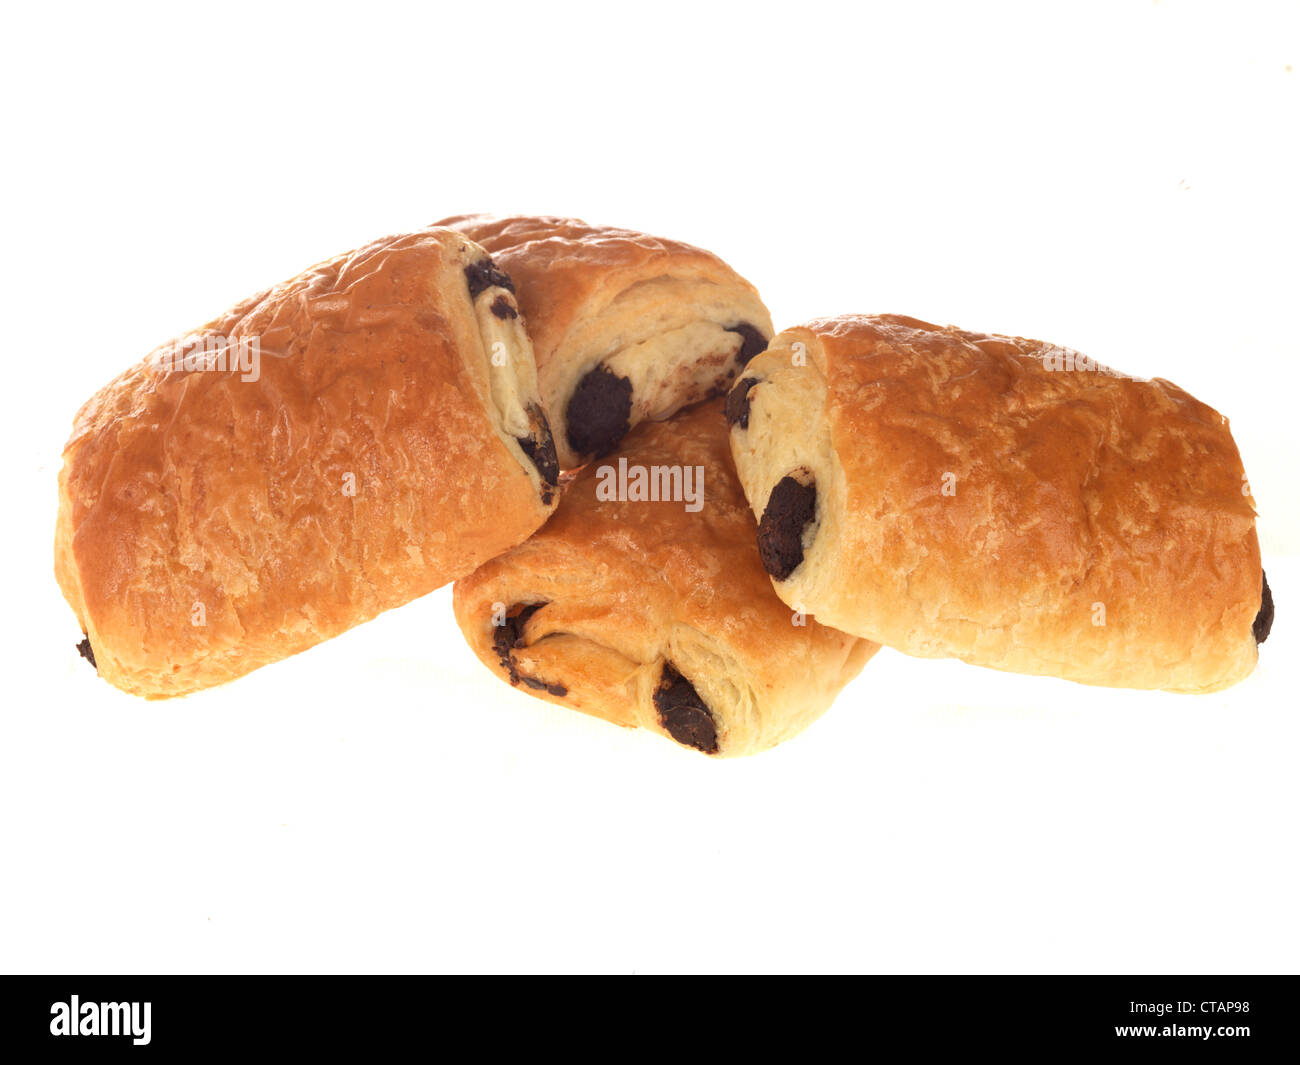 Freshly Baked Pain Aux Chocolate Danish Pastries Ready To Eat, Isolated Against A White Background, With No People Stock Photo